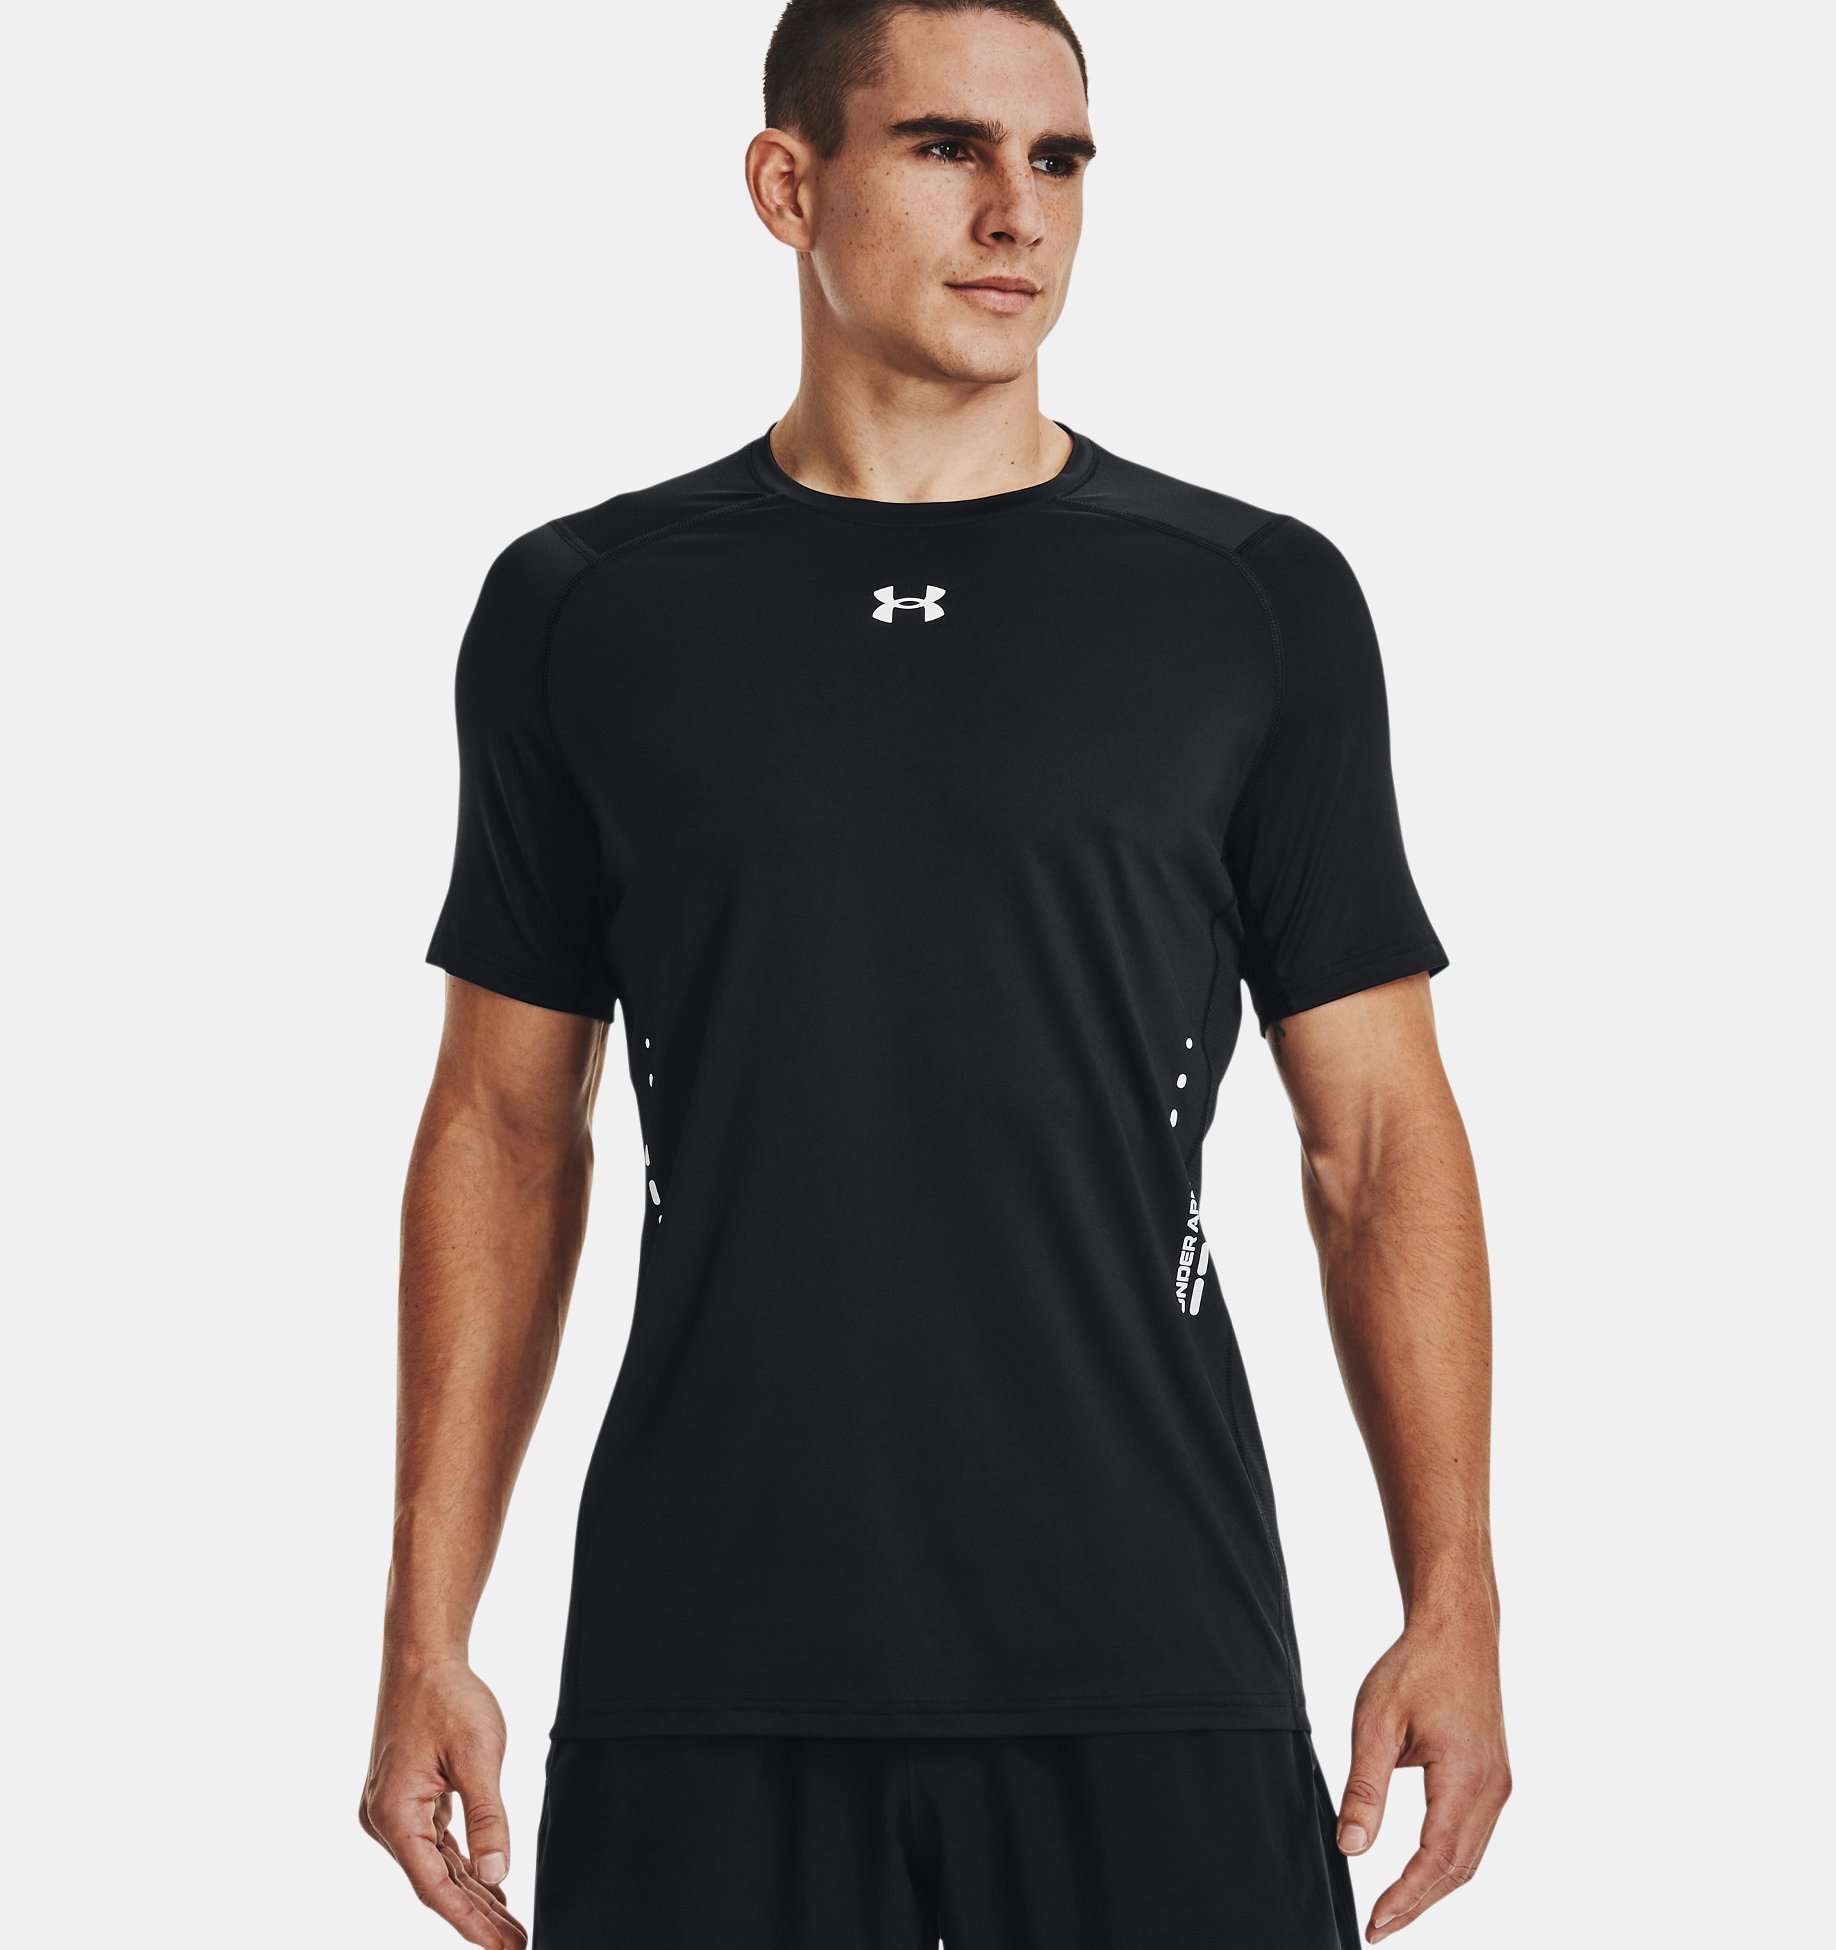 Under Armour Spring Sale: Extra 25% off Sitewide